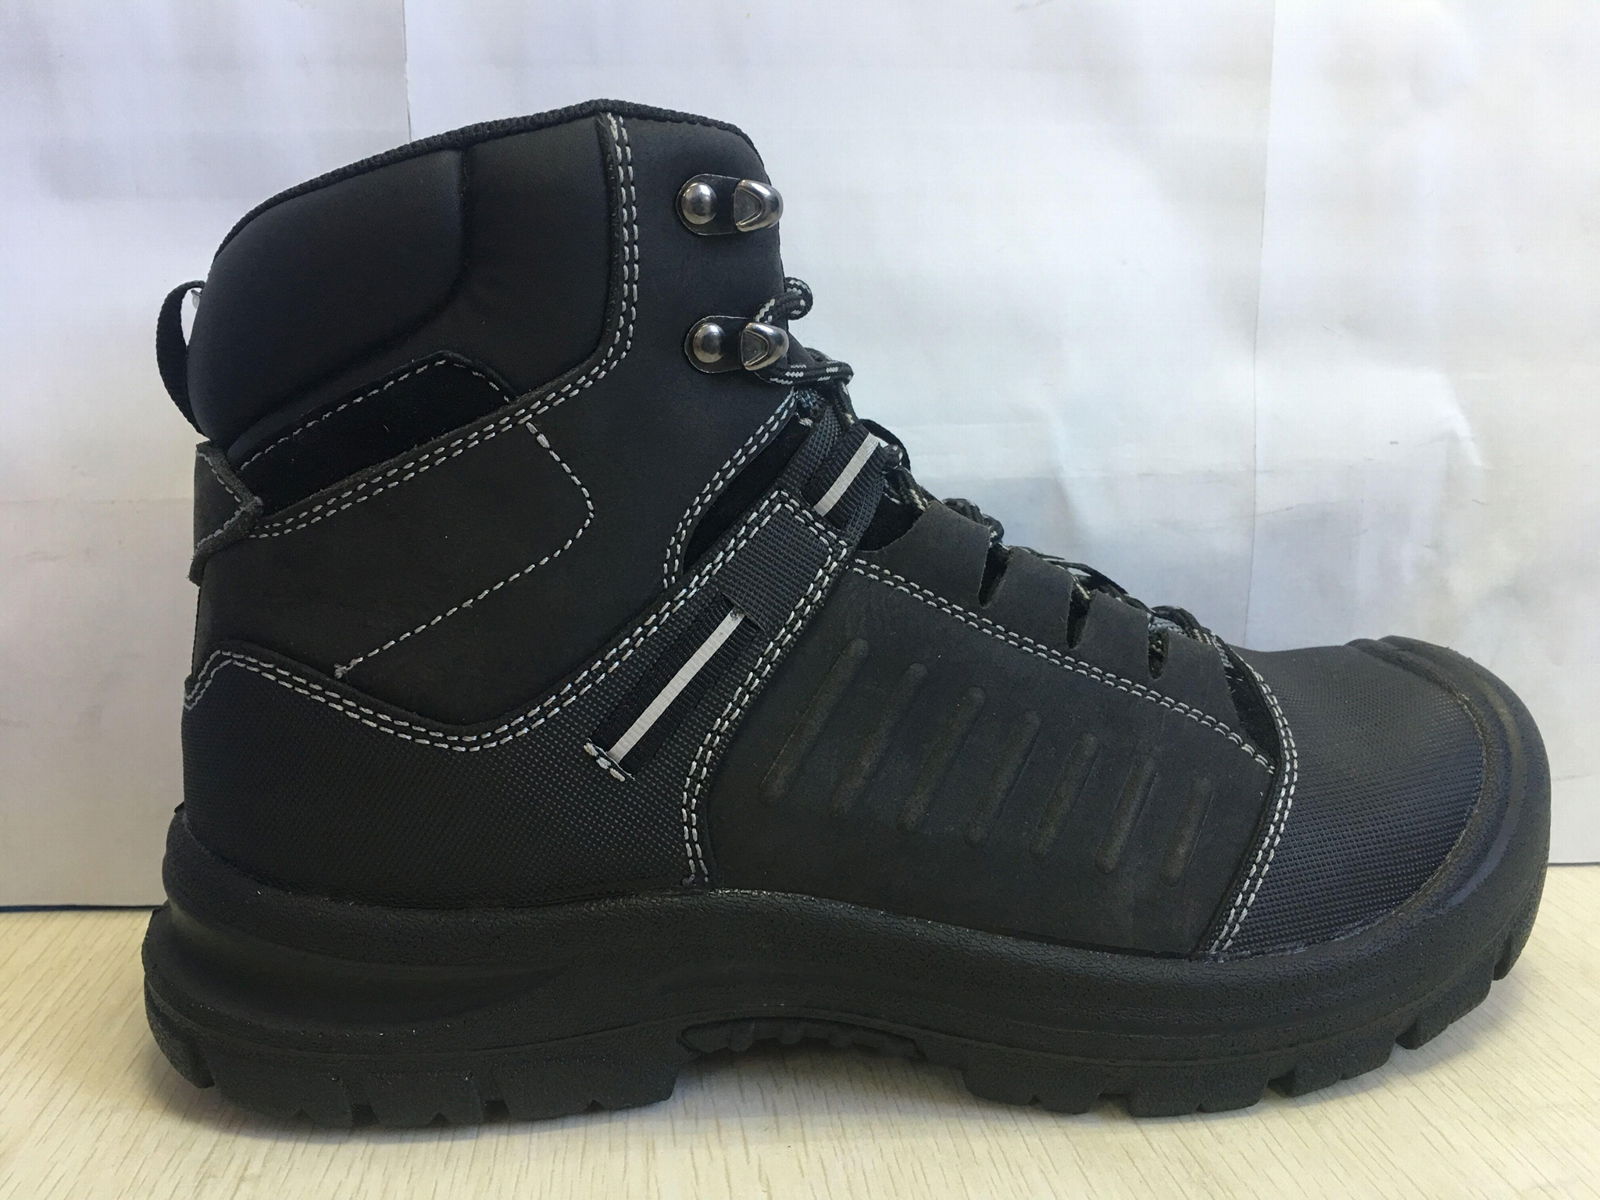 safety shoes (China Manufacturer) - Work & Safety Shoes - Shoes ...